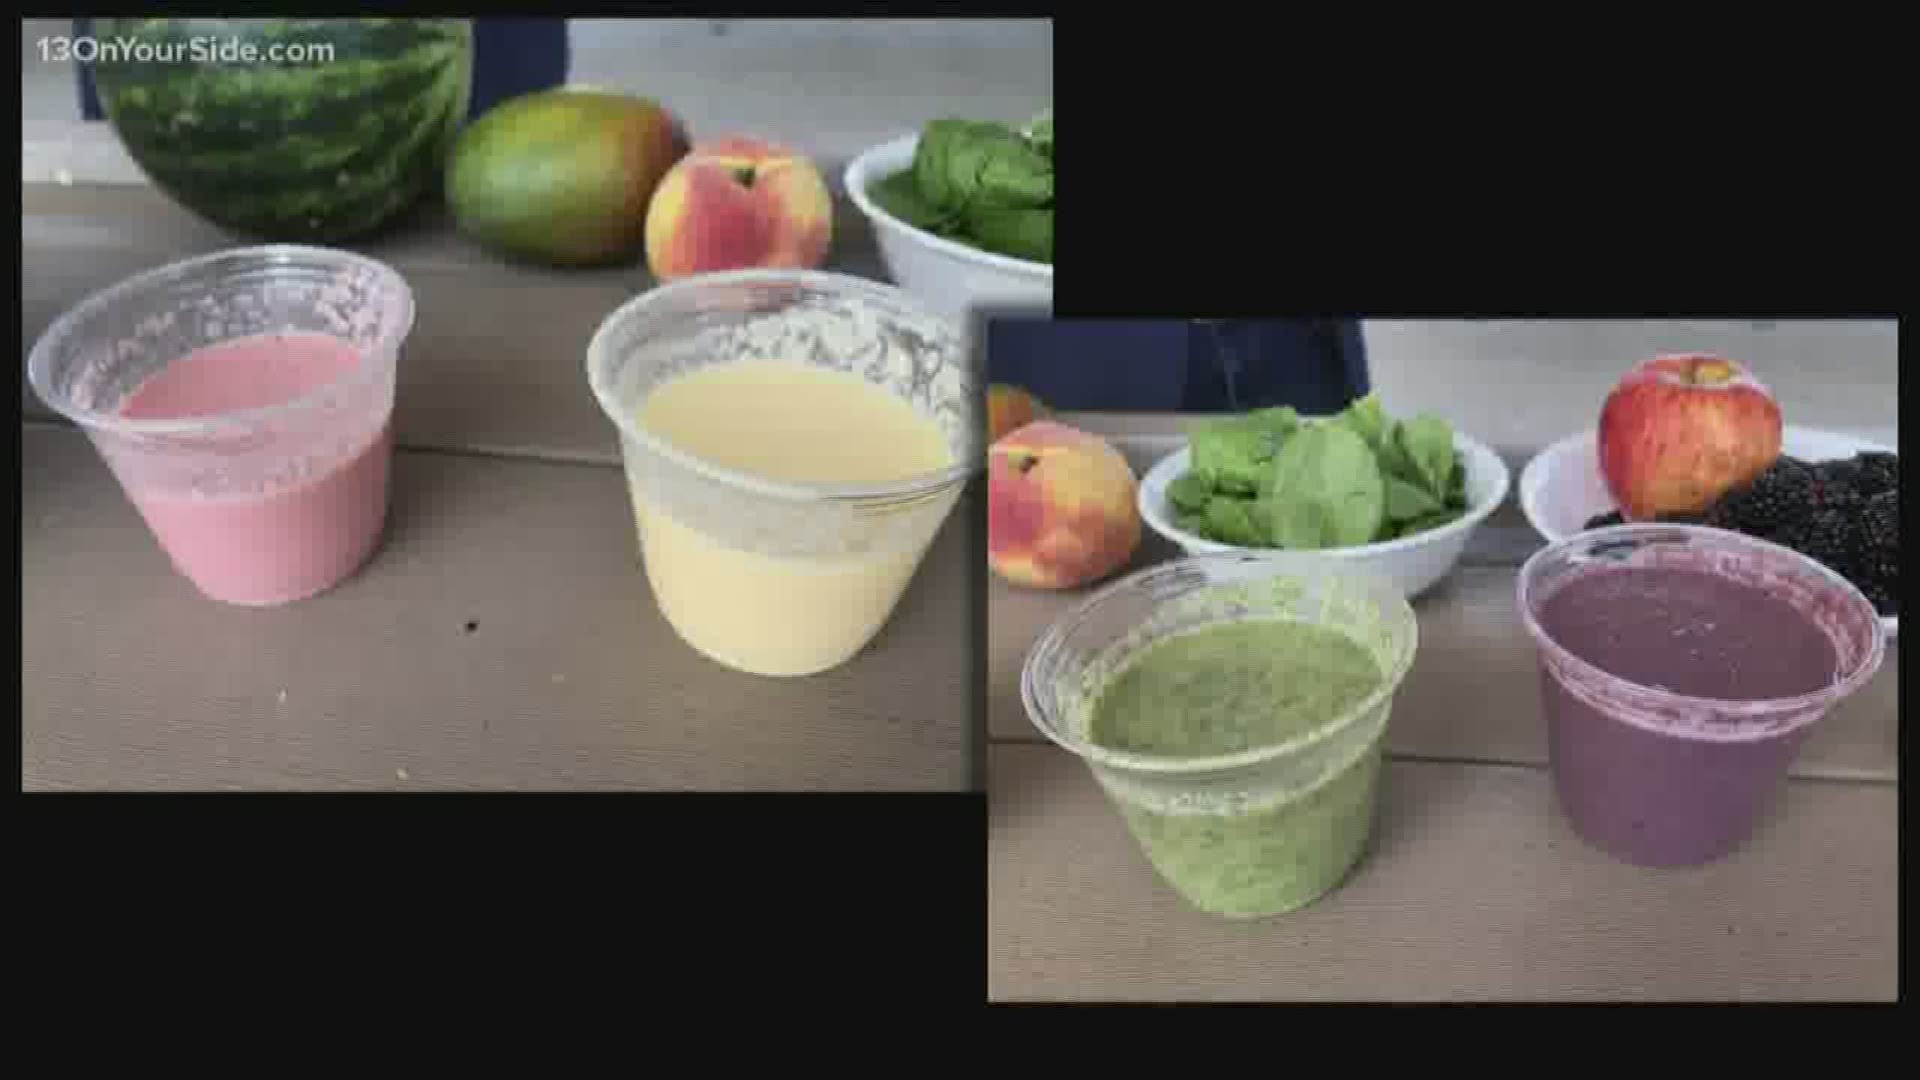 The summer is, unfortunately, coming to an end. So, if you've got leftover produce that you need to use up -- we've got the perfect recipes for you today. 
 We stopped by the Muskegon Farmers Market to meet registered dietitian Grace Derocha, who shared some delicious and nutritious end of summer smoothies.